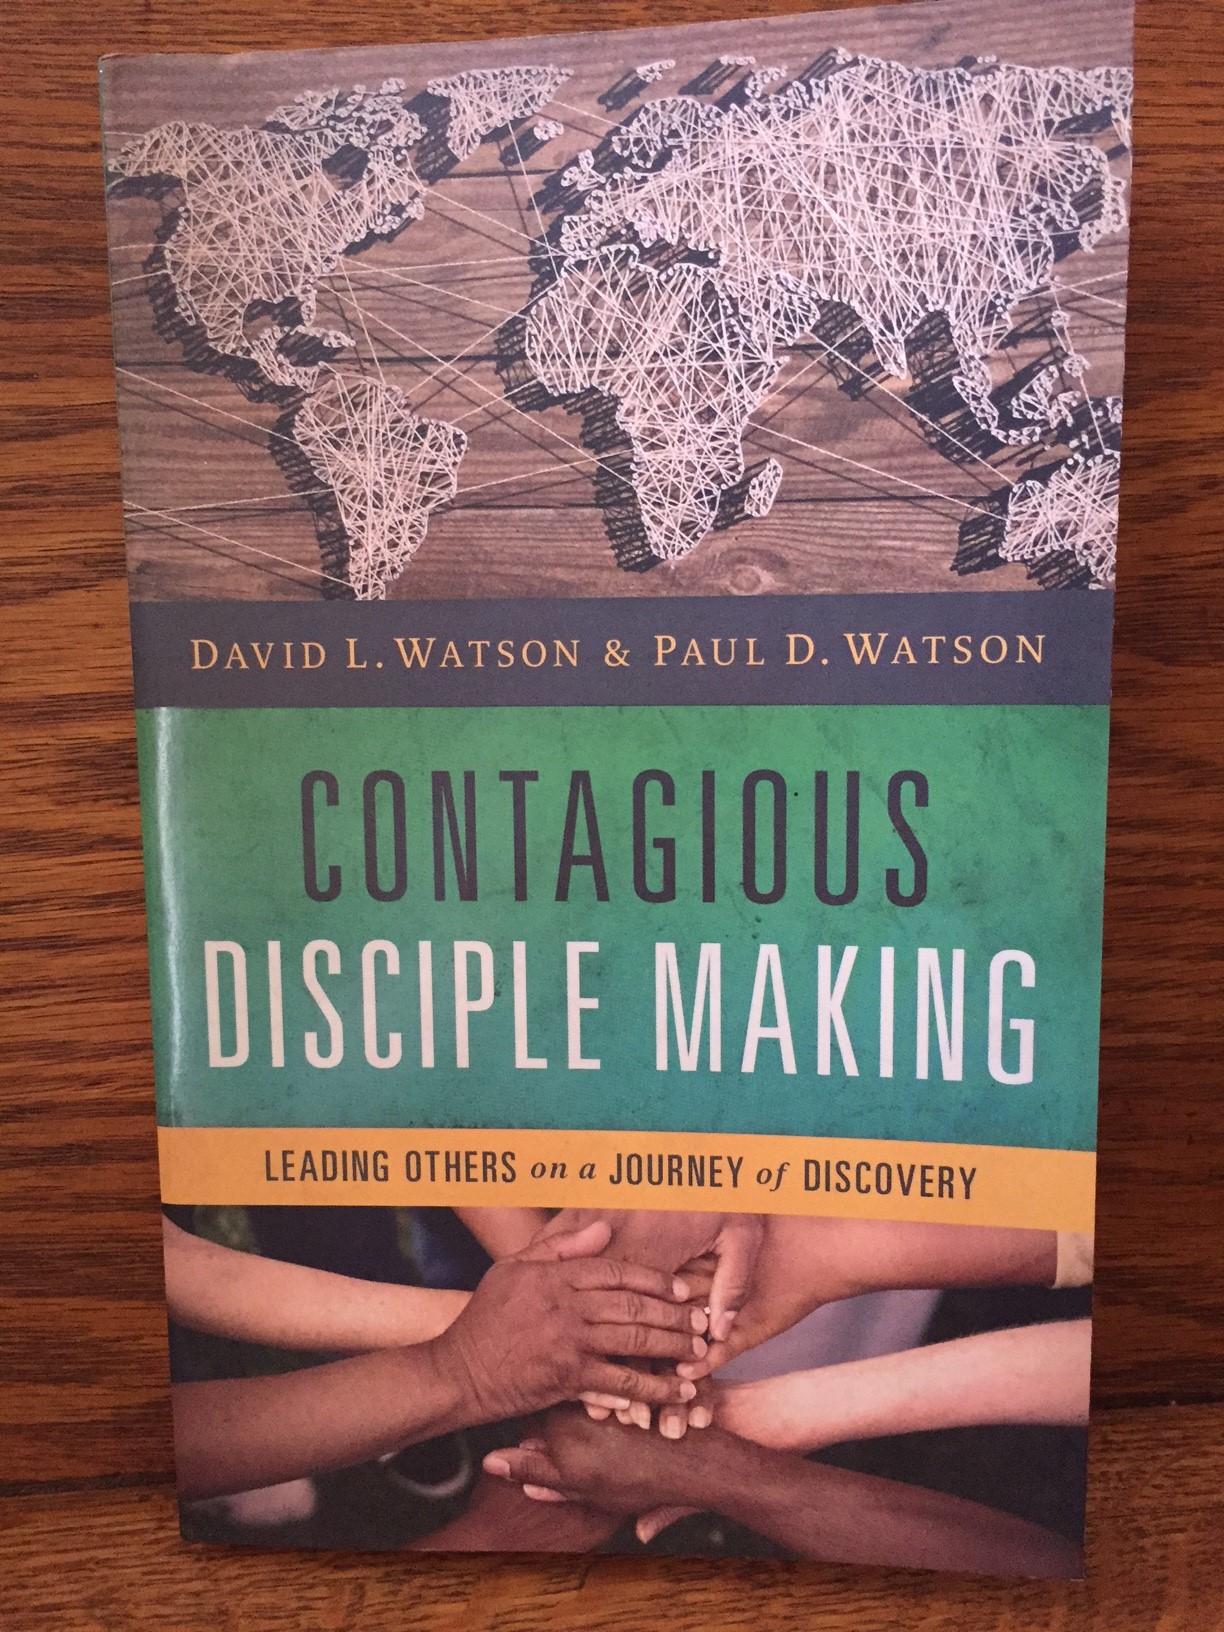 Book Review of Contagious Disciple Making